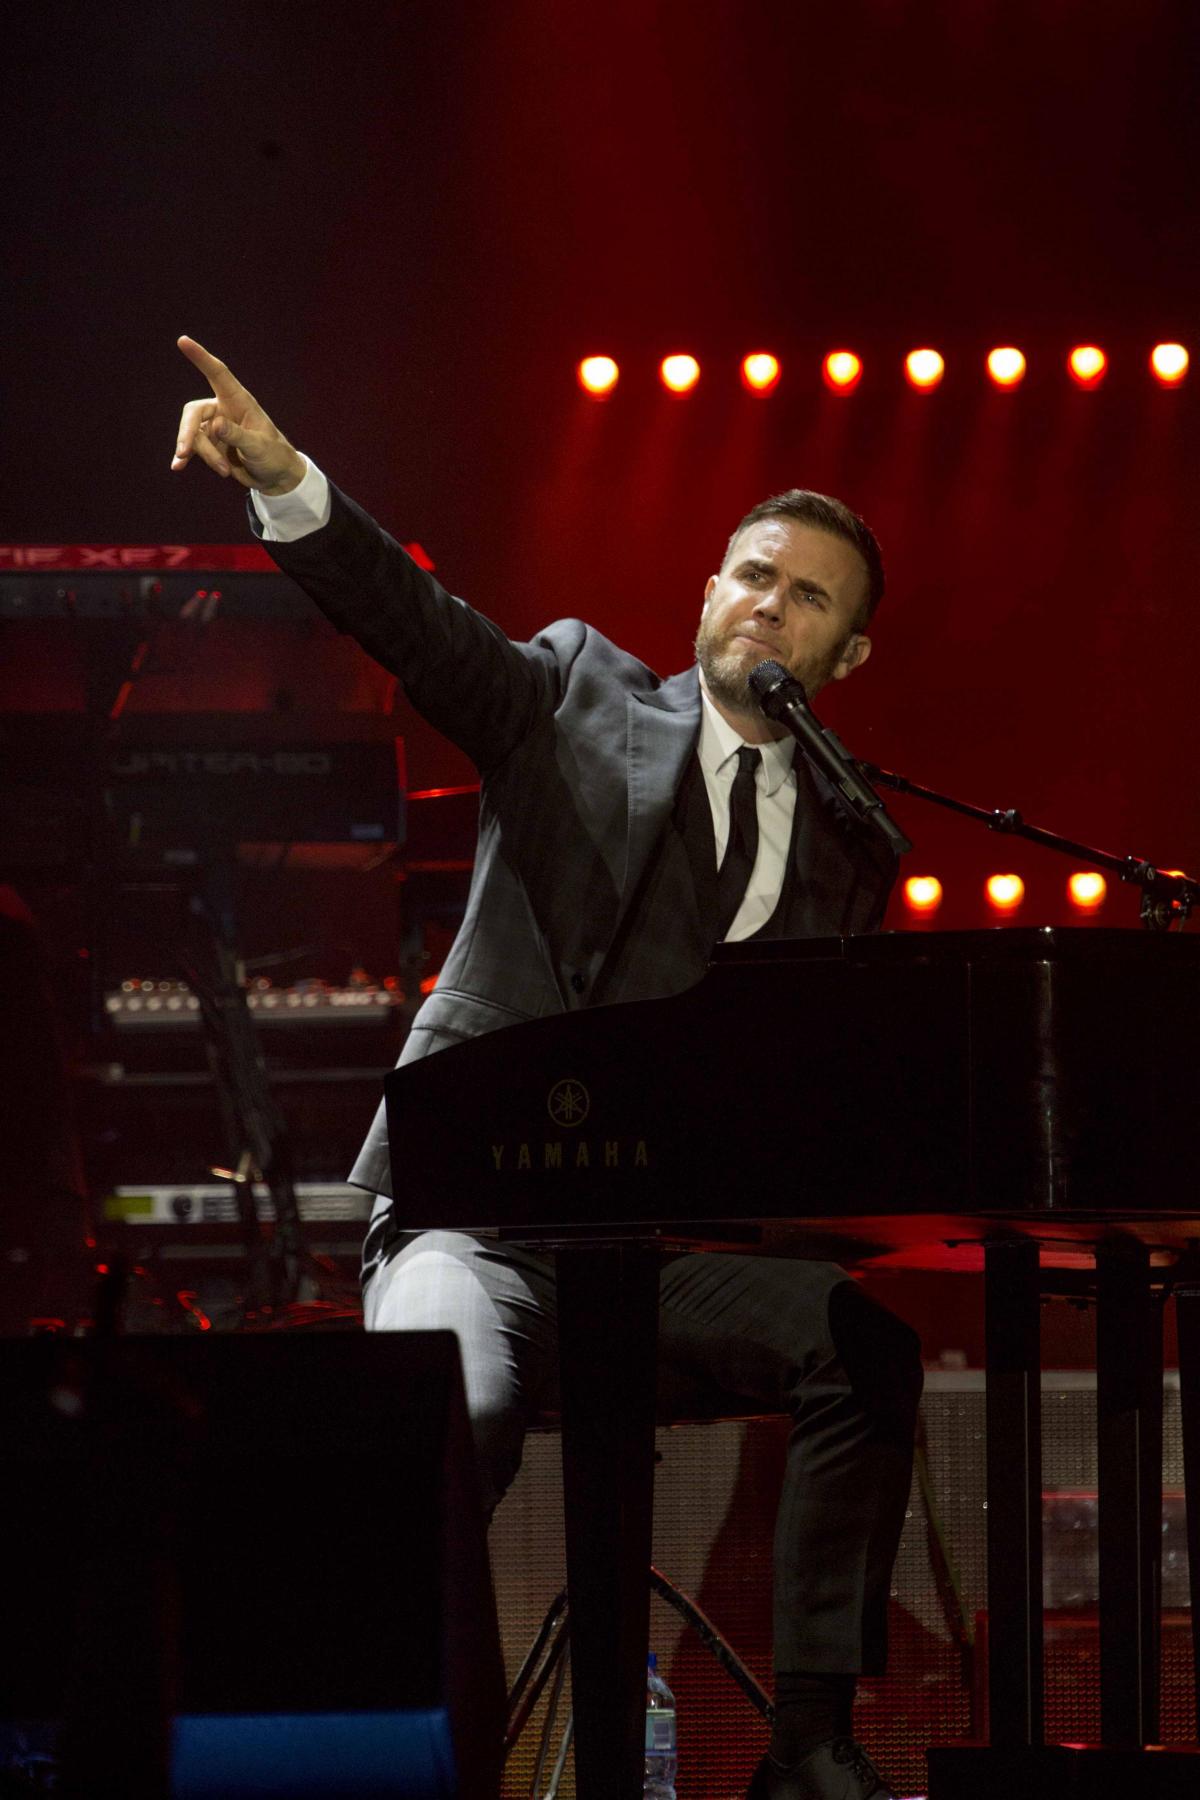 Gary Barlow at the BIC on 23 April 2014. Pictures by www.rockstarimages.co.uk